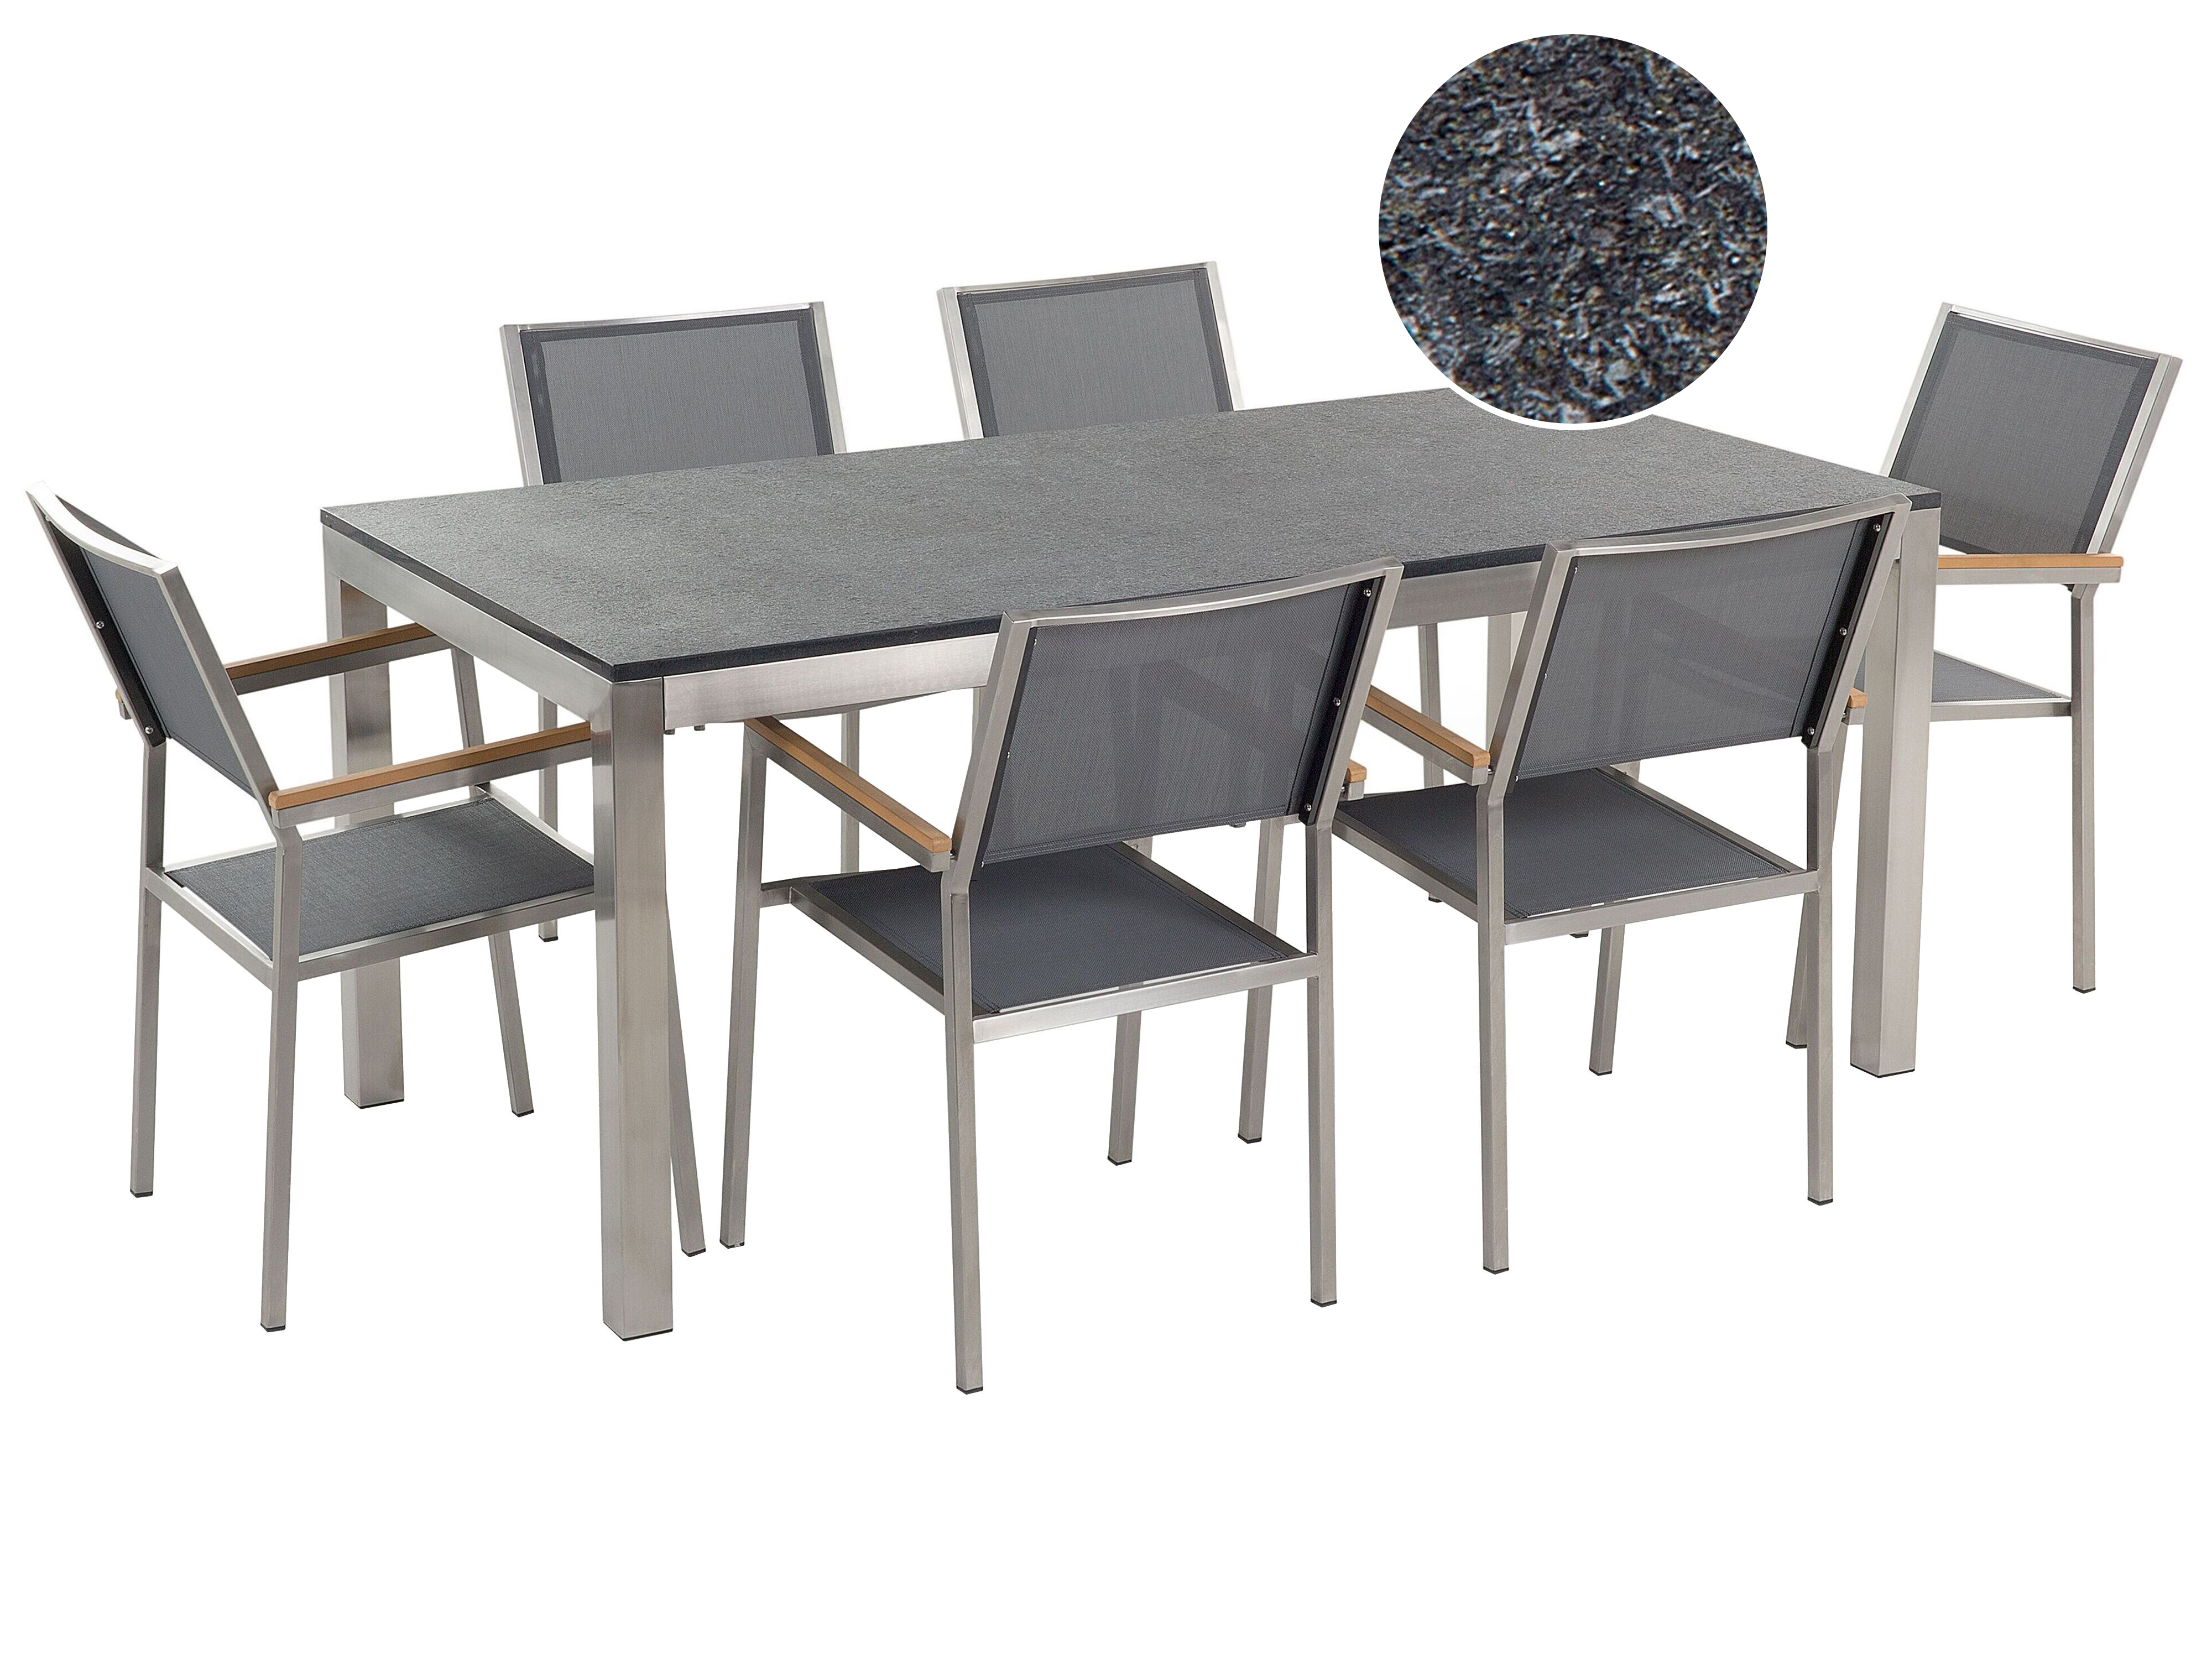 6 Seater Garden Dining Set Flamed Granite Top with Grey Chairs GROSSETO_435199